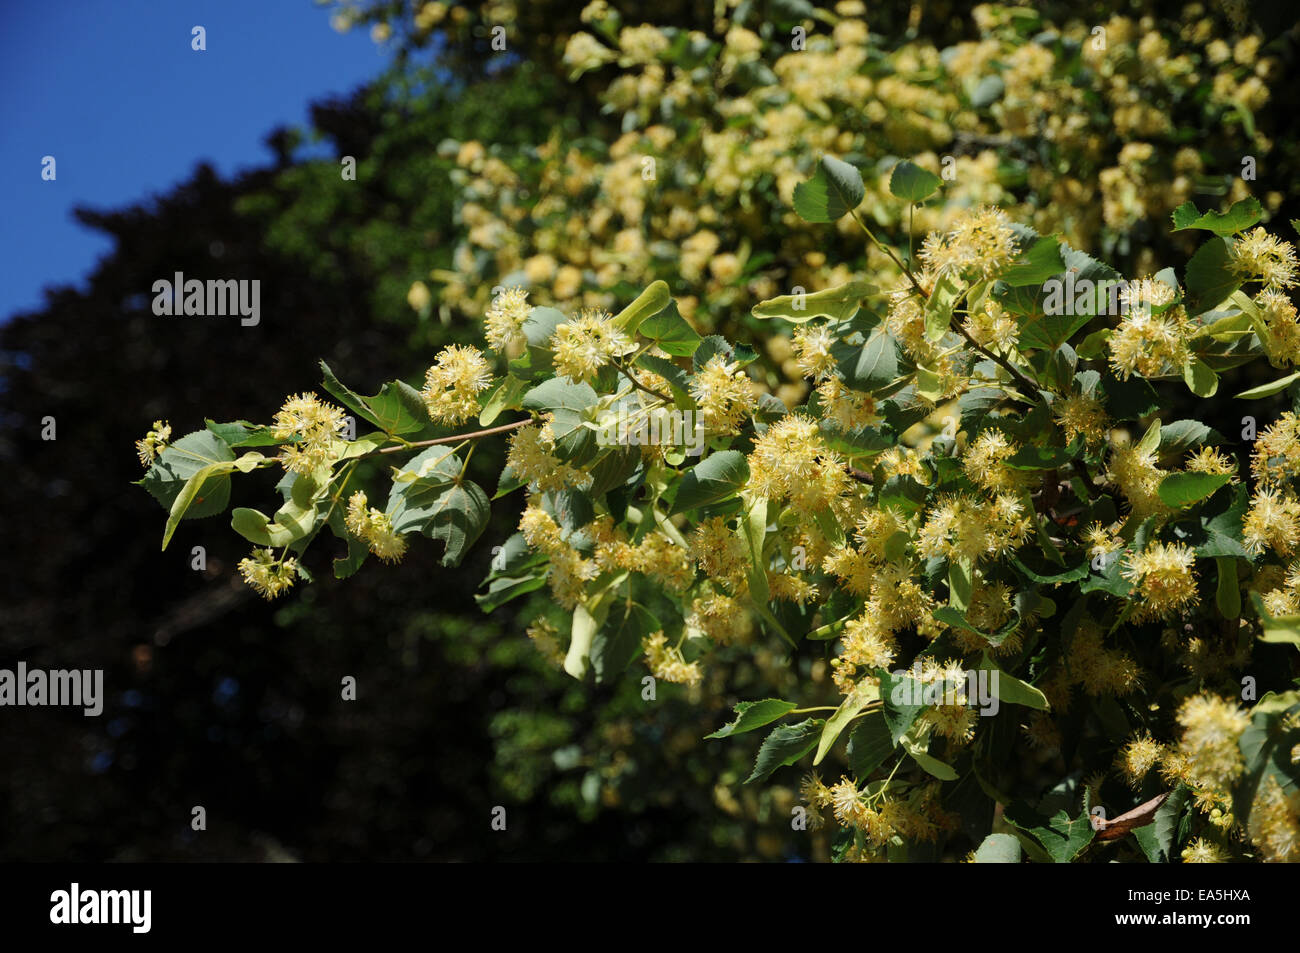 Small-leaved lime Stock Photo